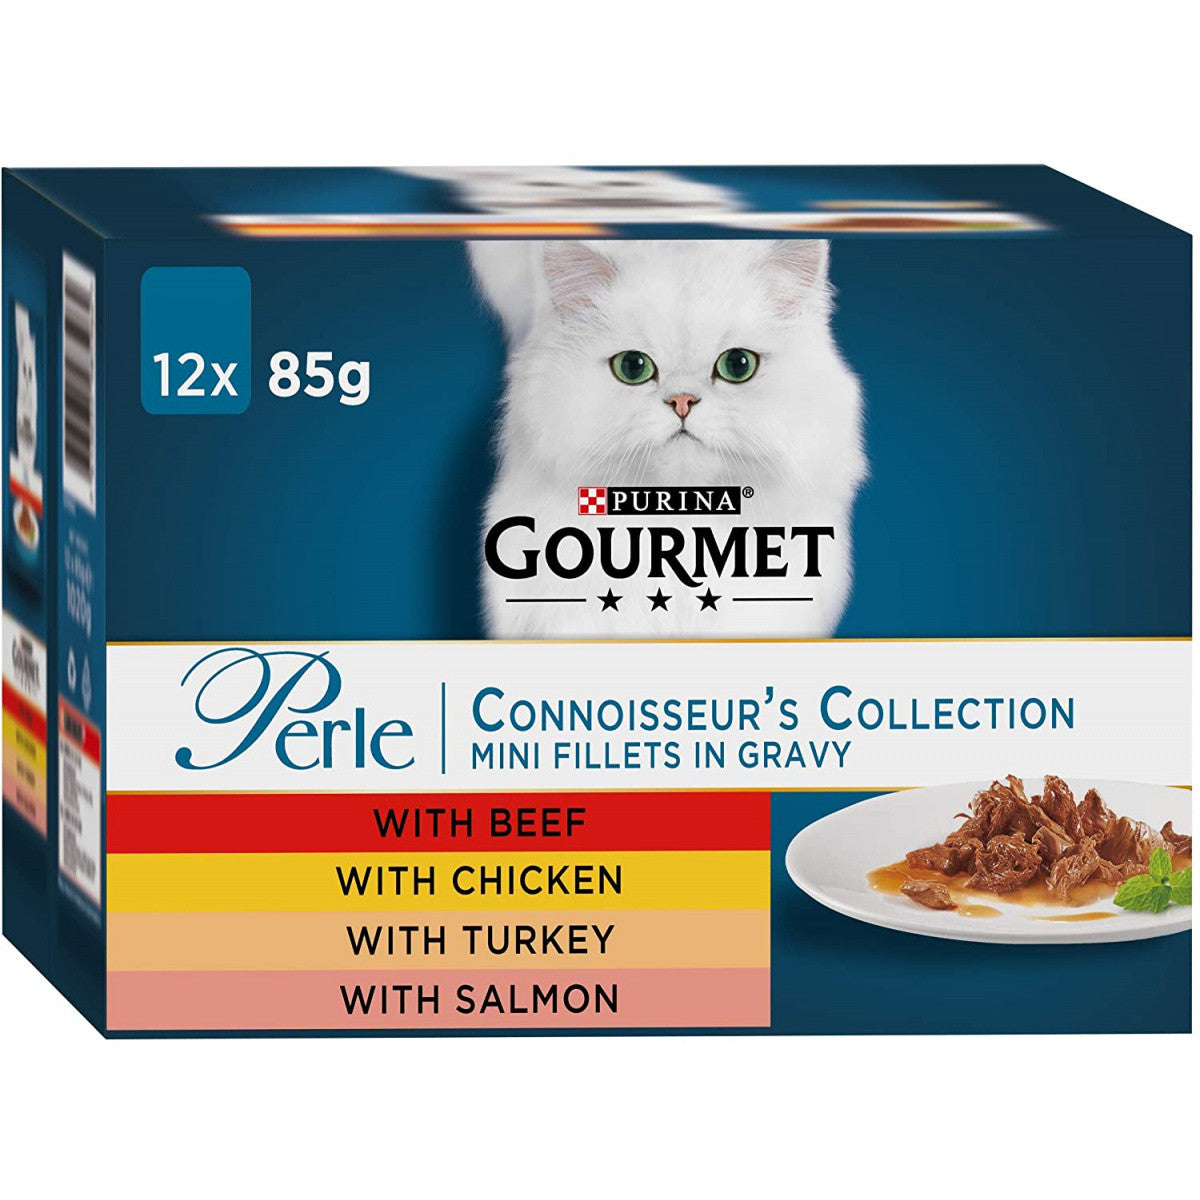 Gourmet Perle Connoisseurs Collection Mini Fillets in Gravy - Wet Cat Food